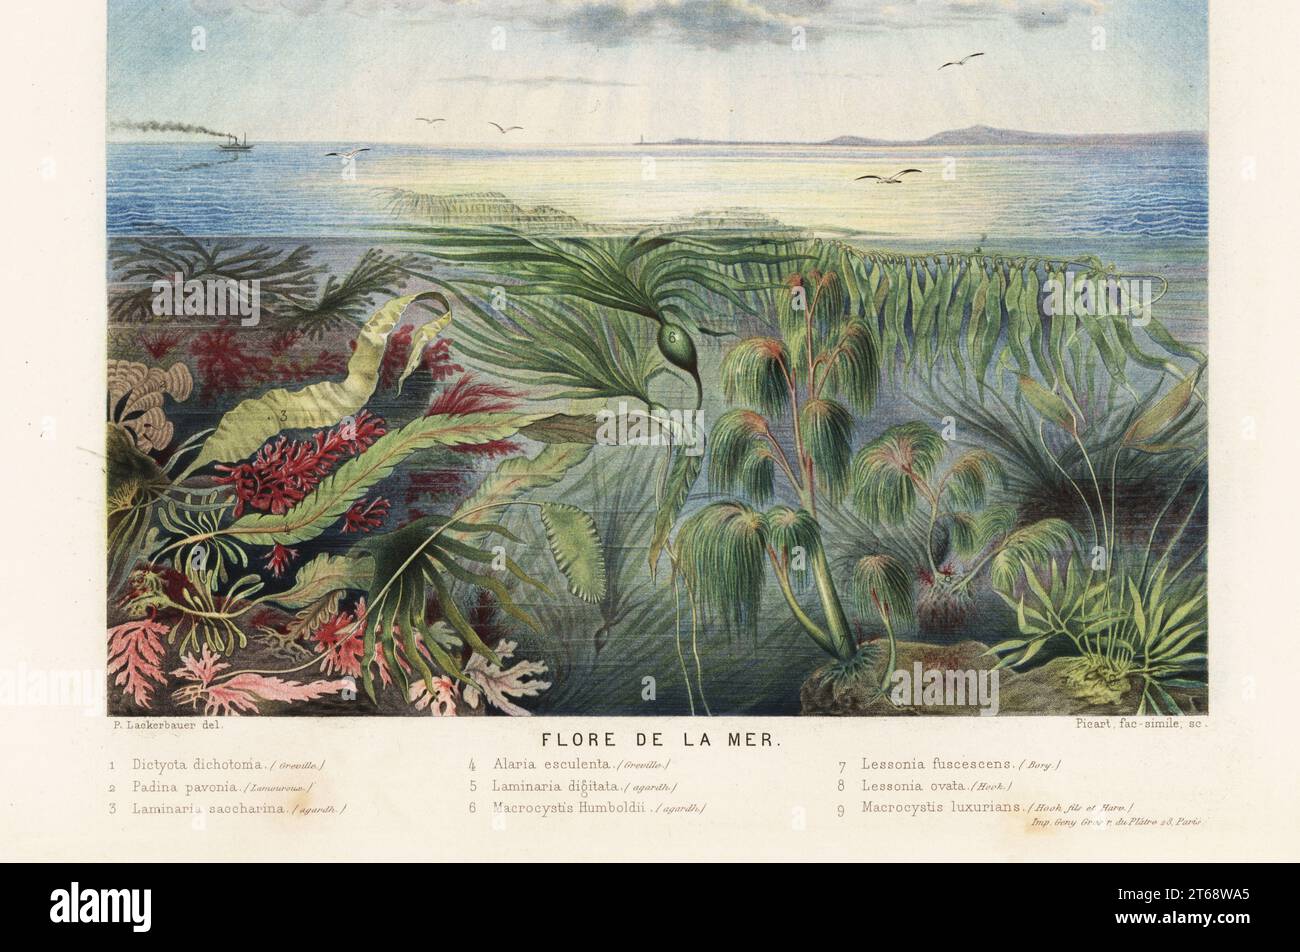 Types of seaweed, kelp and algae in the ocean. Flore de la mer. Brown algae, Dictyota dichotoma 1, peacock's tail, Padina pavonica 2, sugar kelp, Saccharina latissima 3, winged kelp, Alaria esculenta 4, oarwood, Laminaria digitata 5, giant kelp, Macrocystis pyrifera 6,9, and Lessonia flavicans 7,8. Chromolithograph by Pierre Lackerbauer from Alfred Fredols Le Monde de la Mer, the World of the Sea, edited by Olivier Fredol, Librairie Hachette et. Cie., Paris, 1881. Alfred Fredol was the pseudonym of French zoologist and botanist Alfred Moquin-Tandon, 1804-1863. Stock Photo